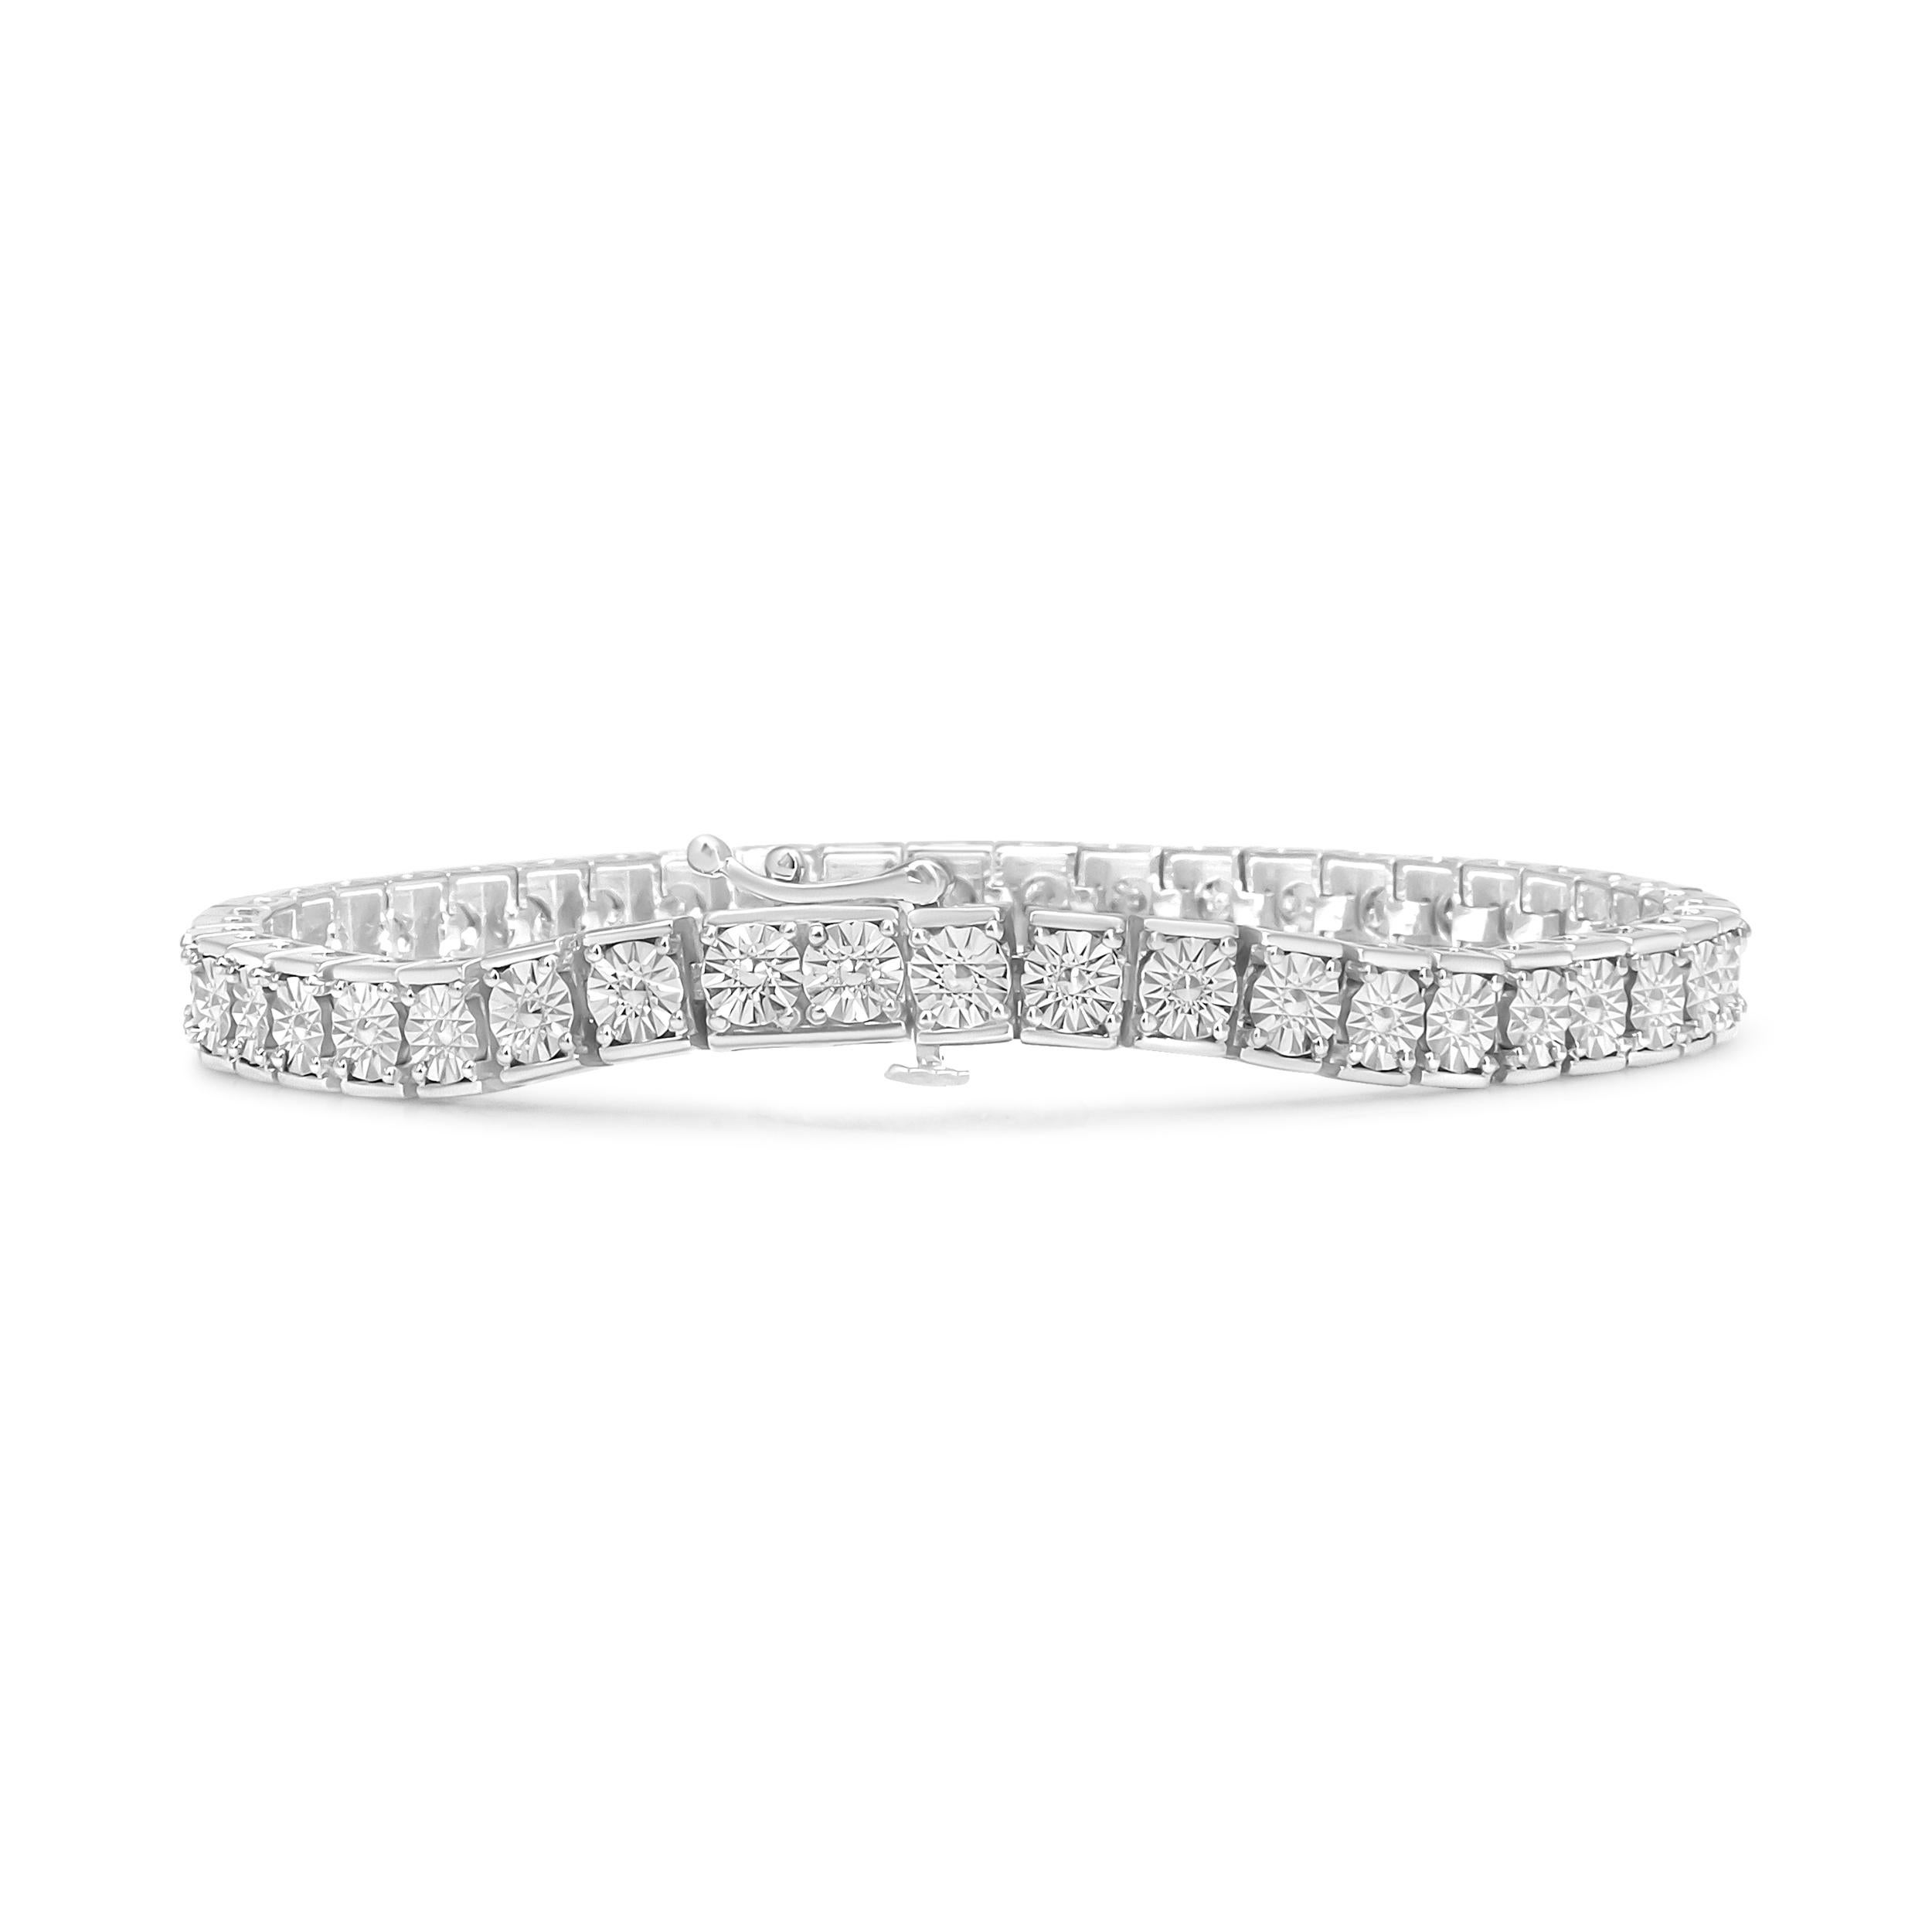 When it comes to jewelry, the classic diamond tennis bracelet is fail-proof. Highlighting 24 natural round diamonds in a miracle setting that total up to 1/4 cttw, the Sterling Silver piece is truly a versatile pick for any occasions, from a day